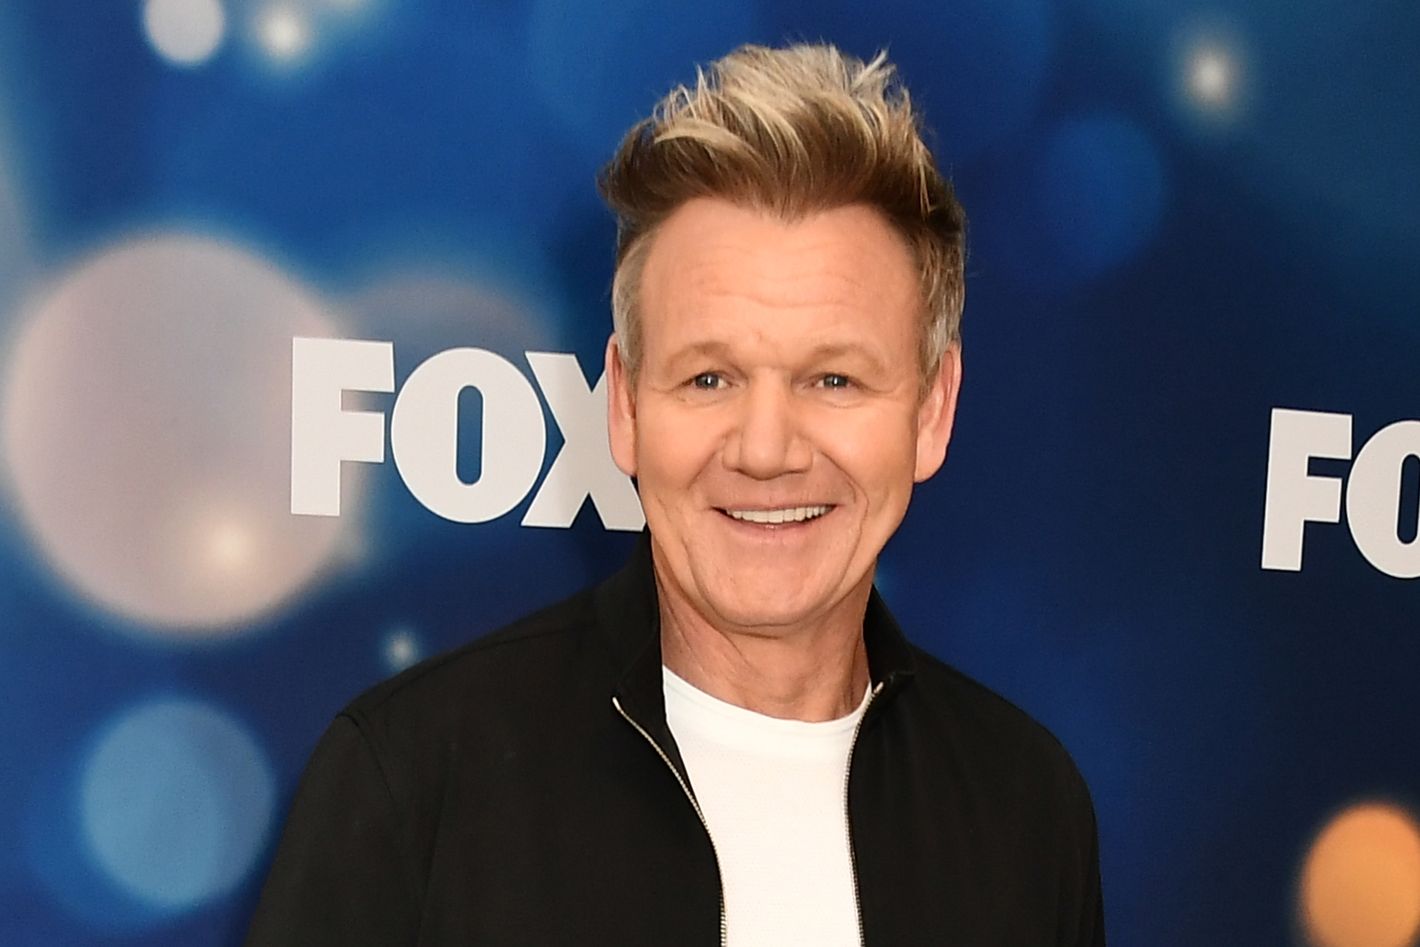 Gordon Ramsay Offers Bike Safety Lessons in Father’s Day Post